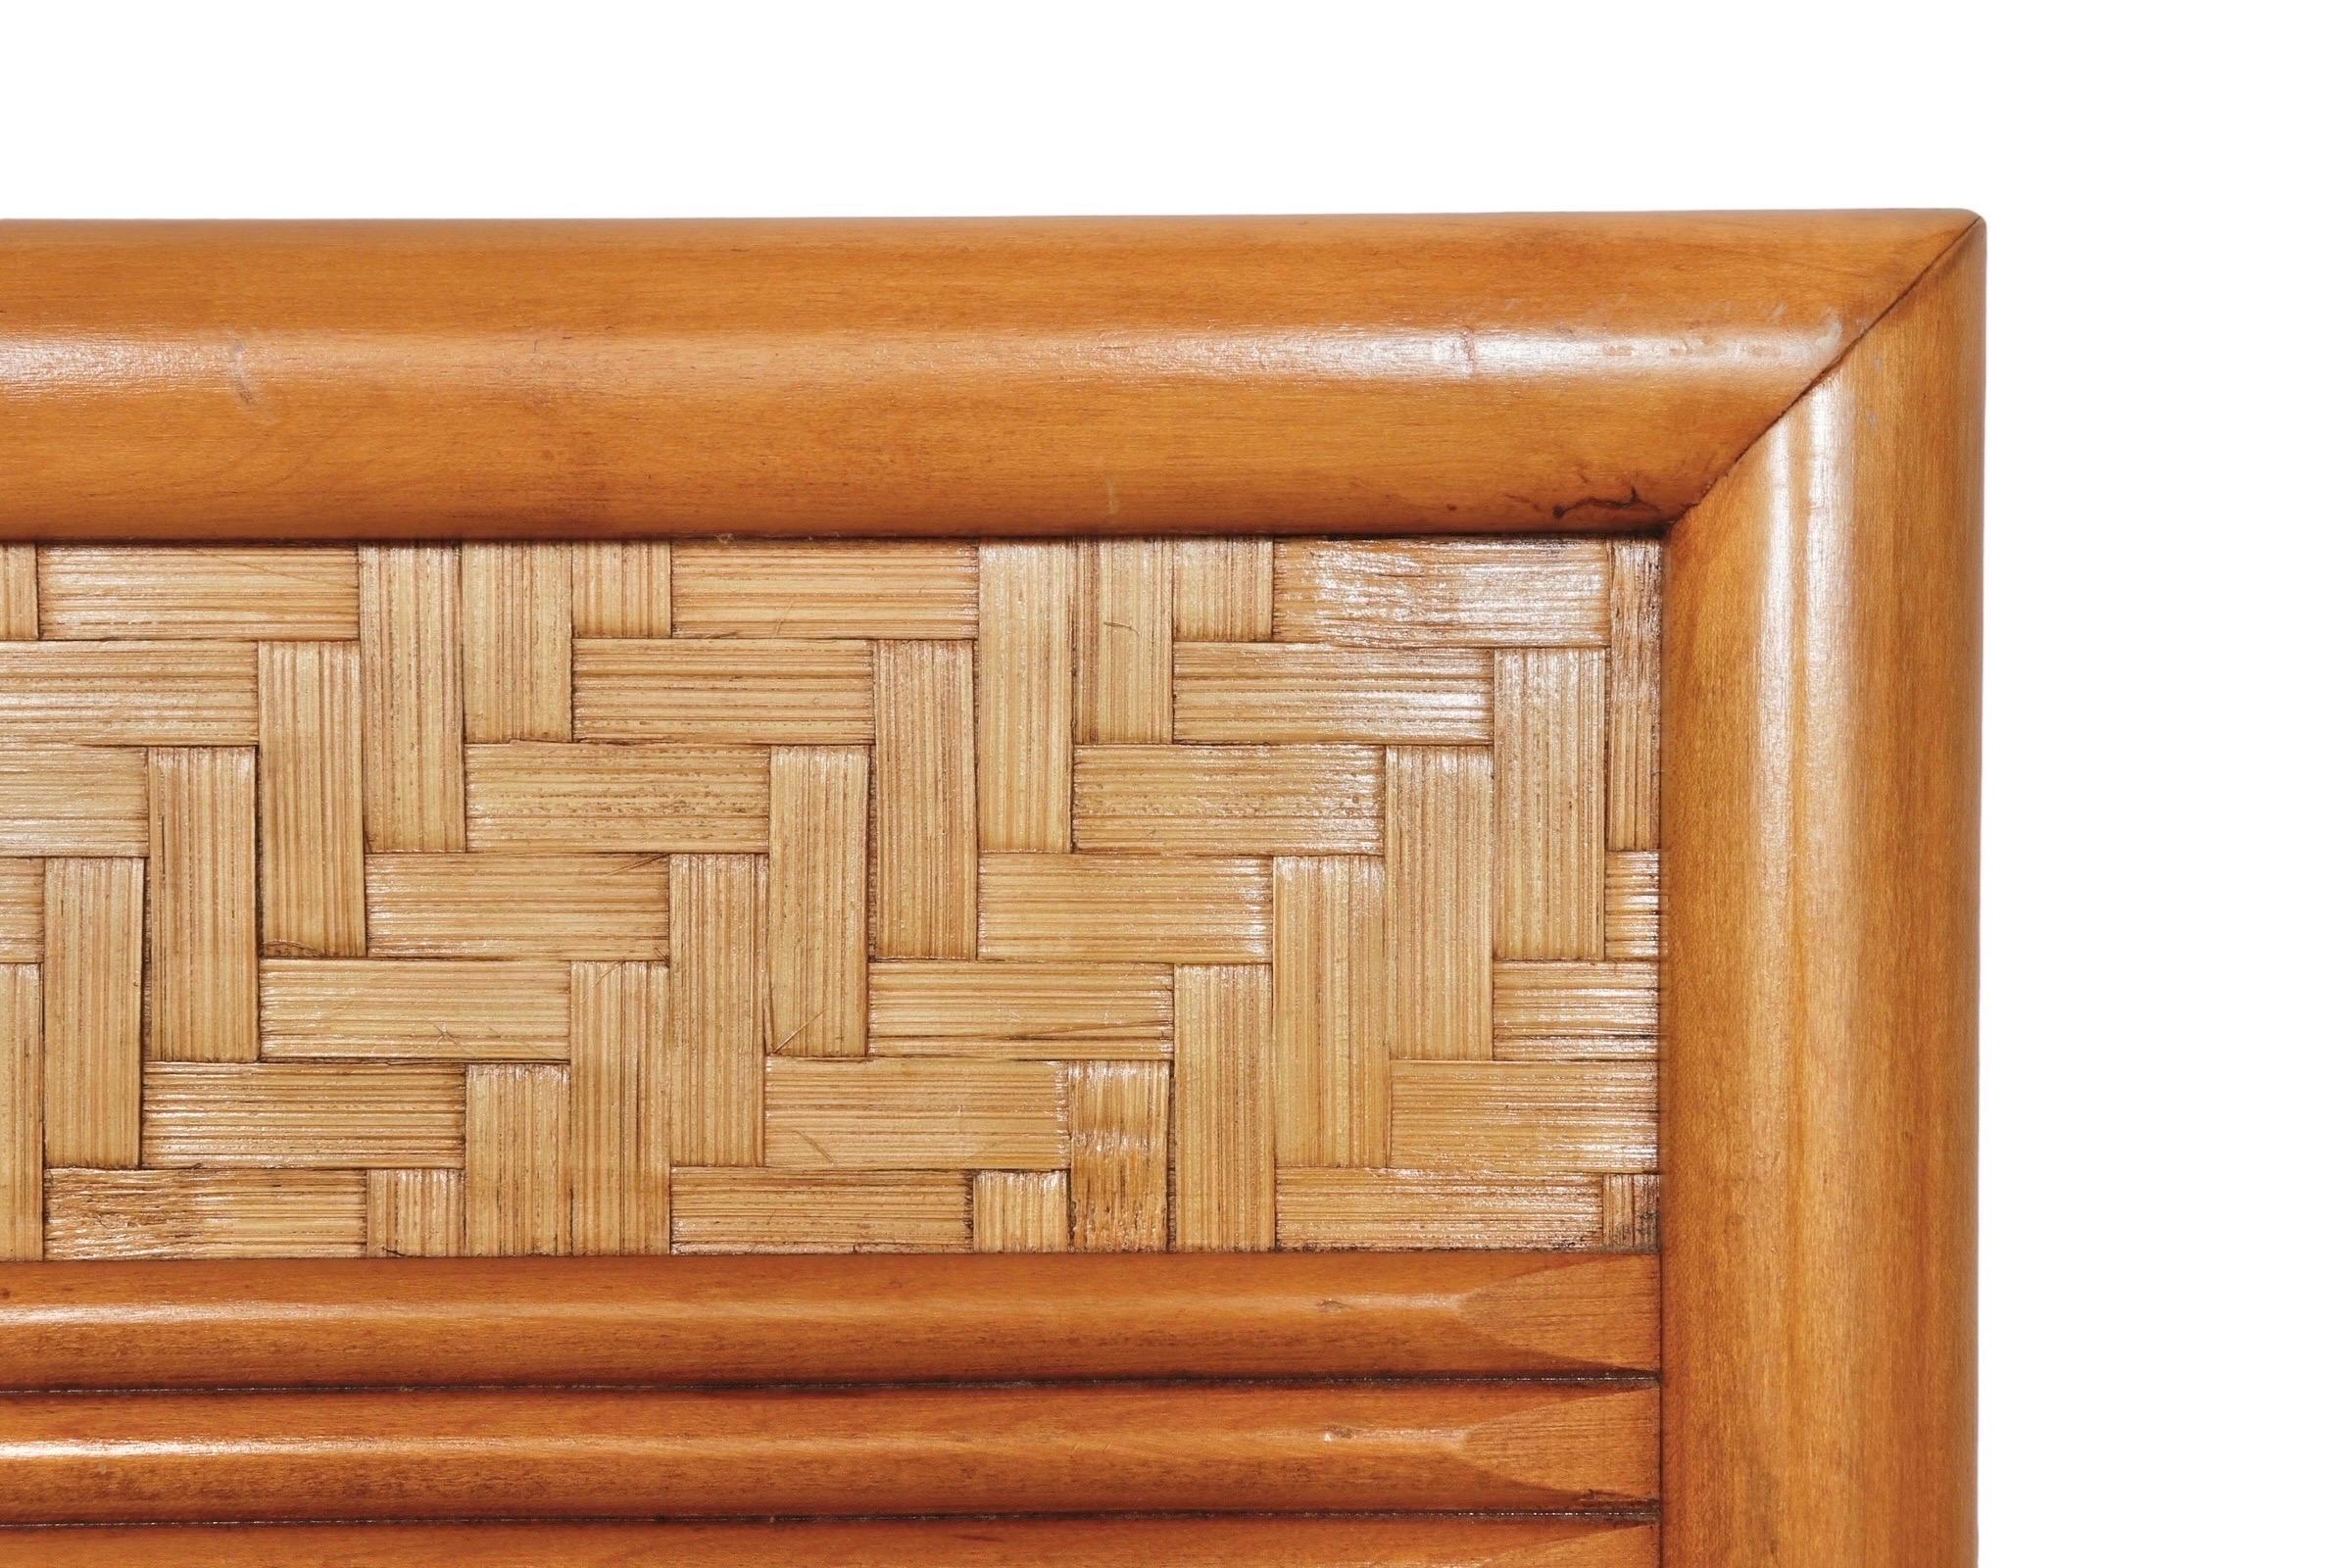 A queen size headboard made by Dixie furniture company. A maple frame is decorated with a panel of rattan woven in a herringbone pattern. Marked ‘Dixie made in the USA’ in the back.